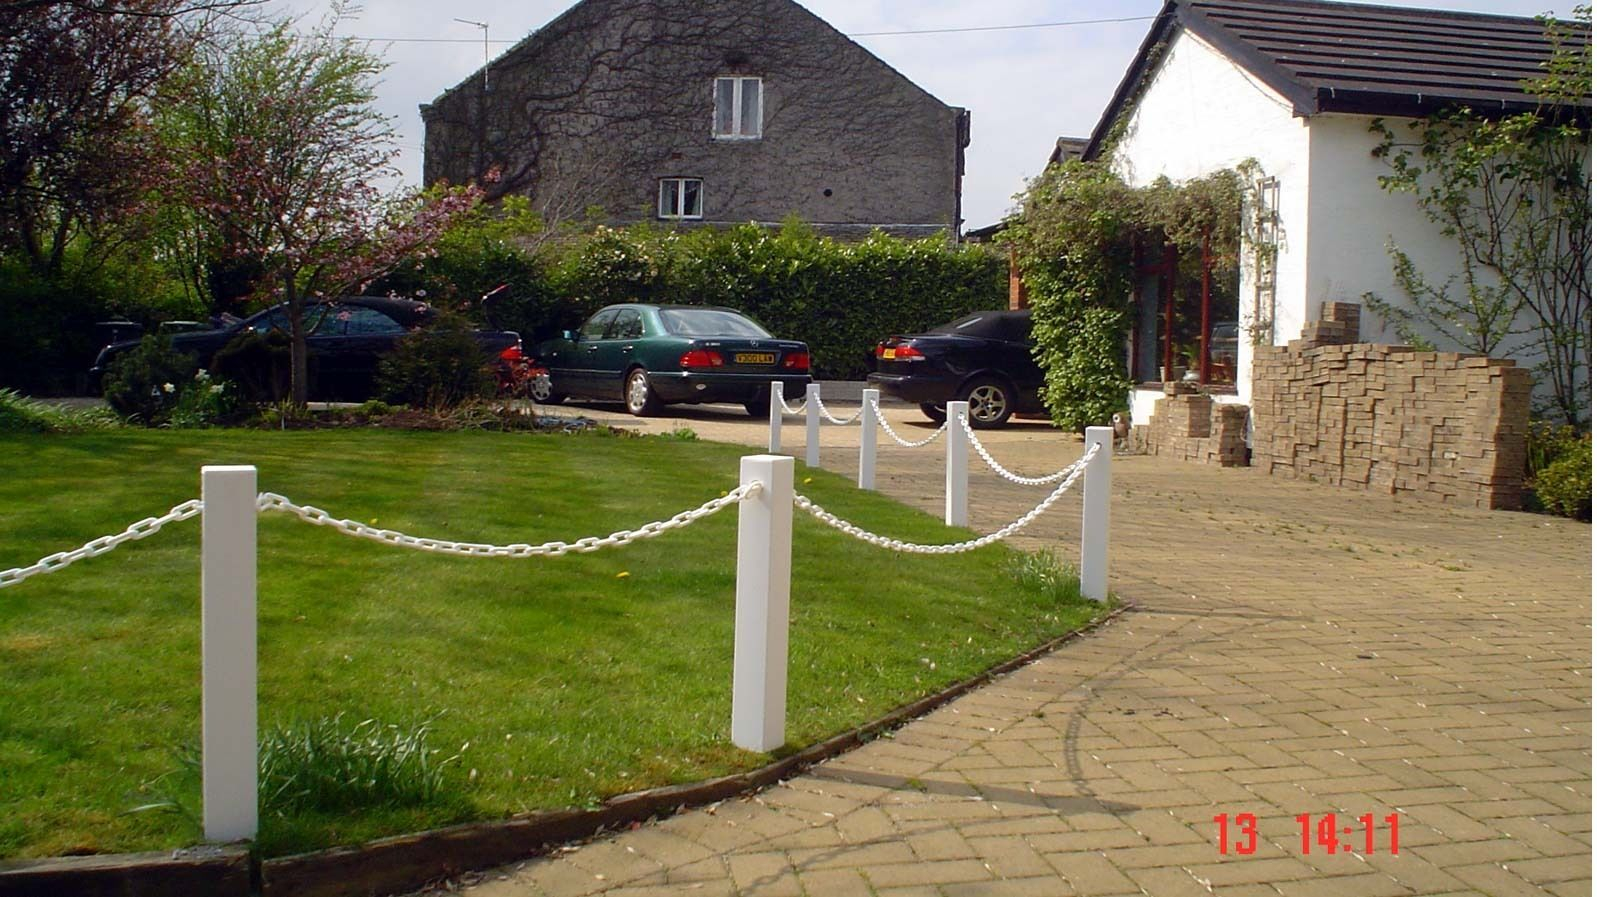 Plastic Upvc Post And Chain Fencing Driveway Garden Fence Posts pertaining to sizing 1597 X 897